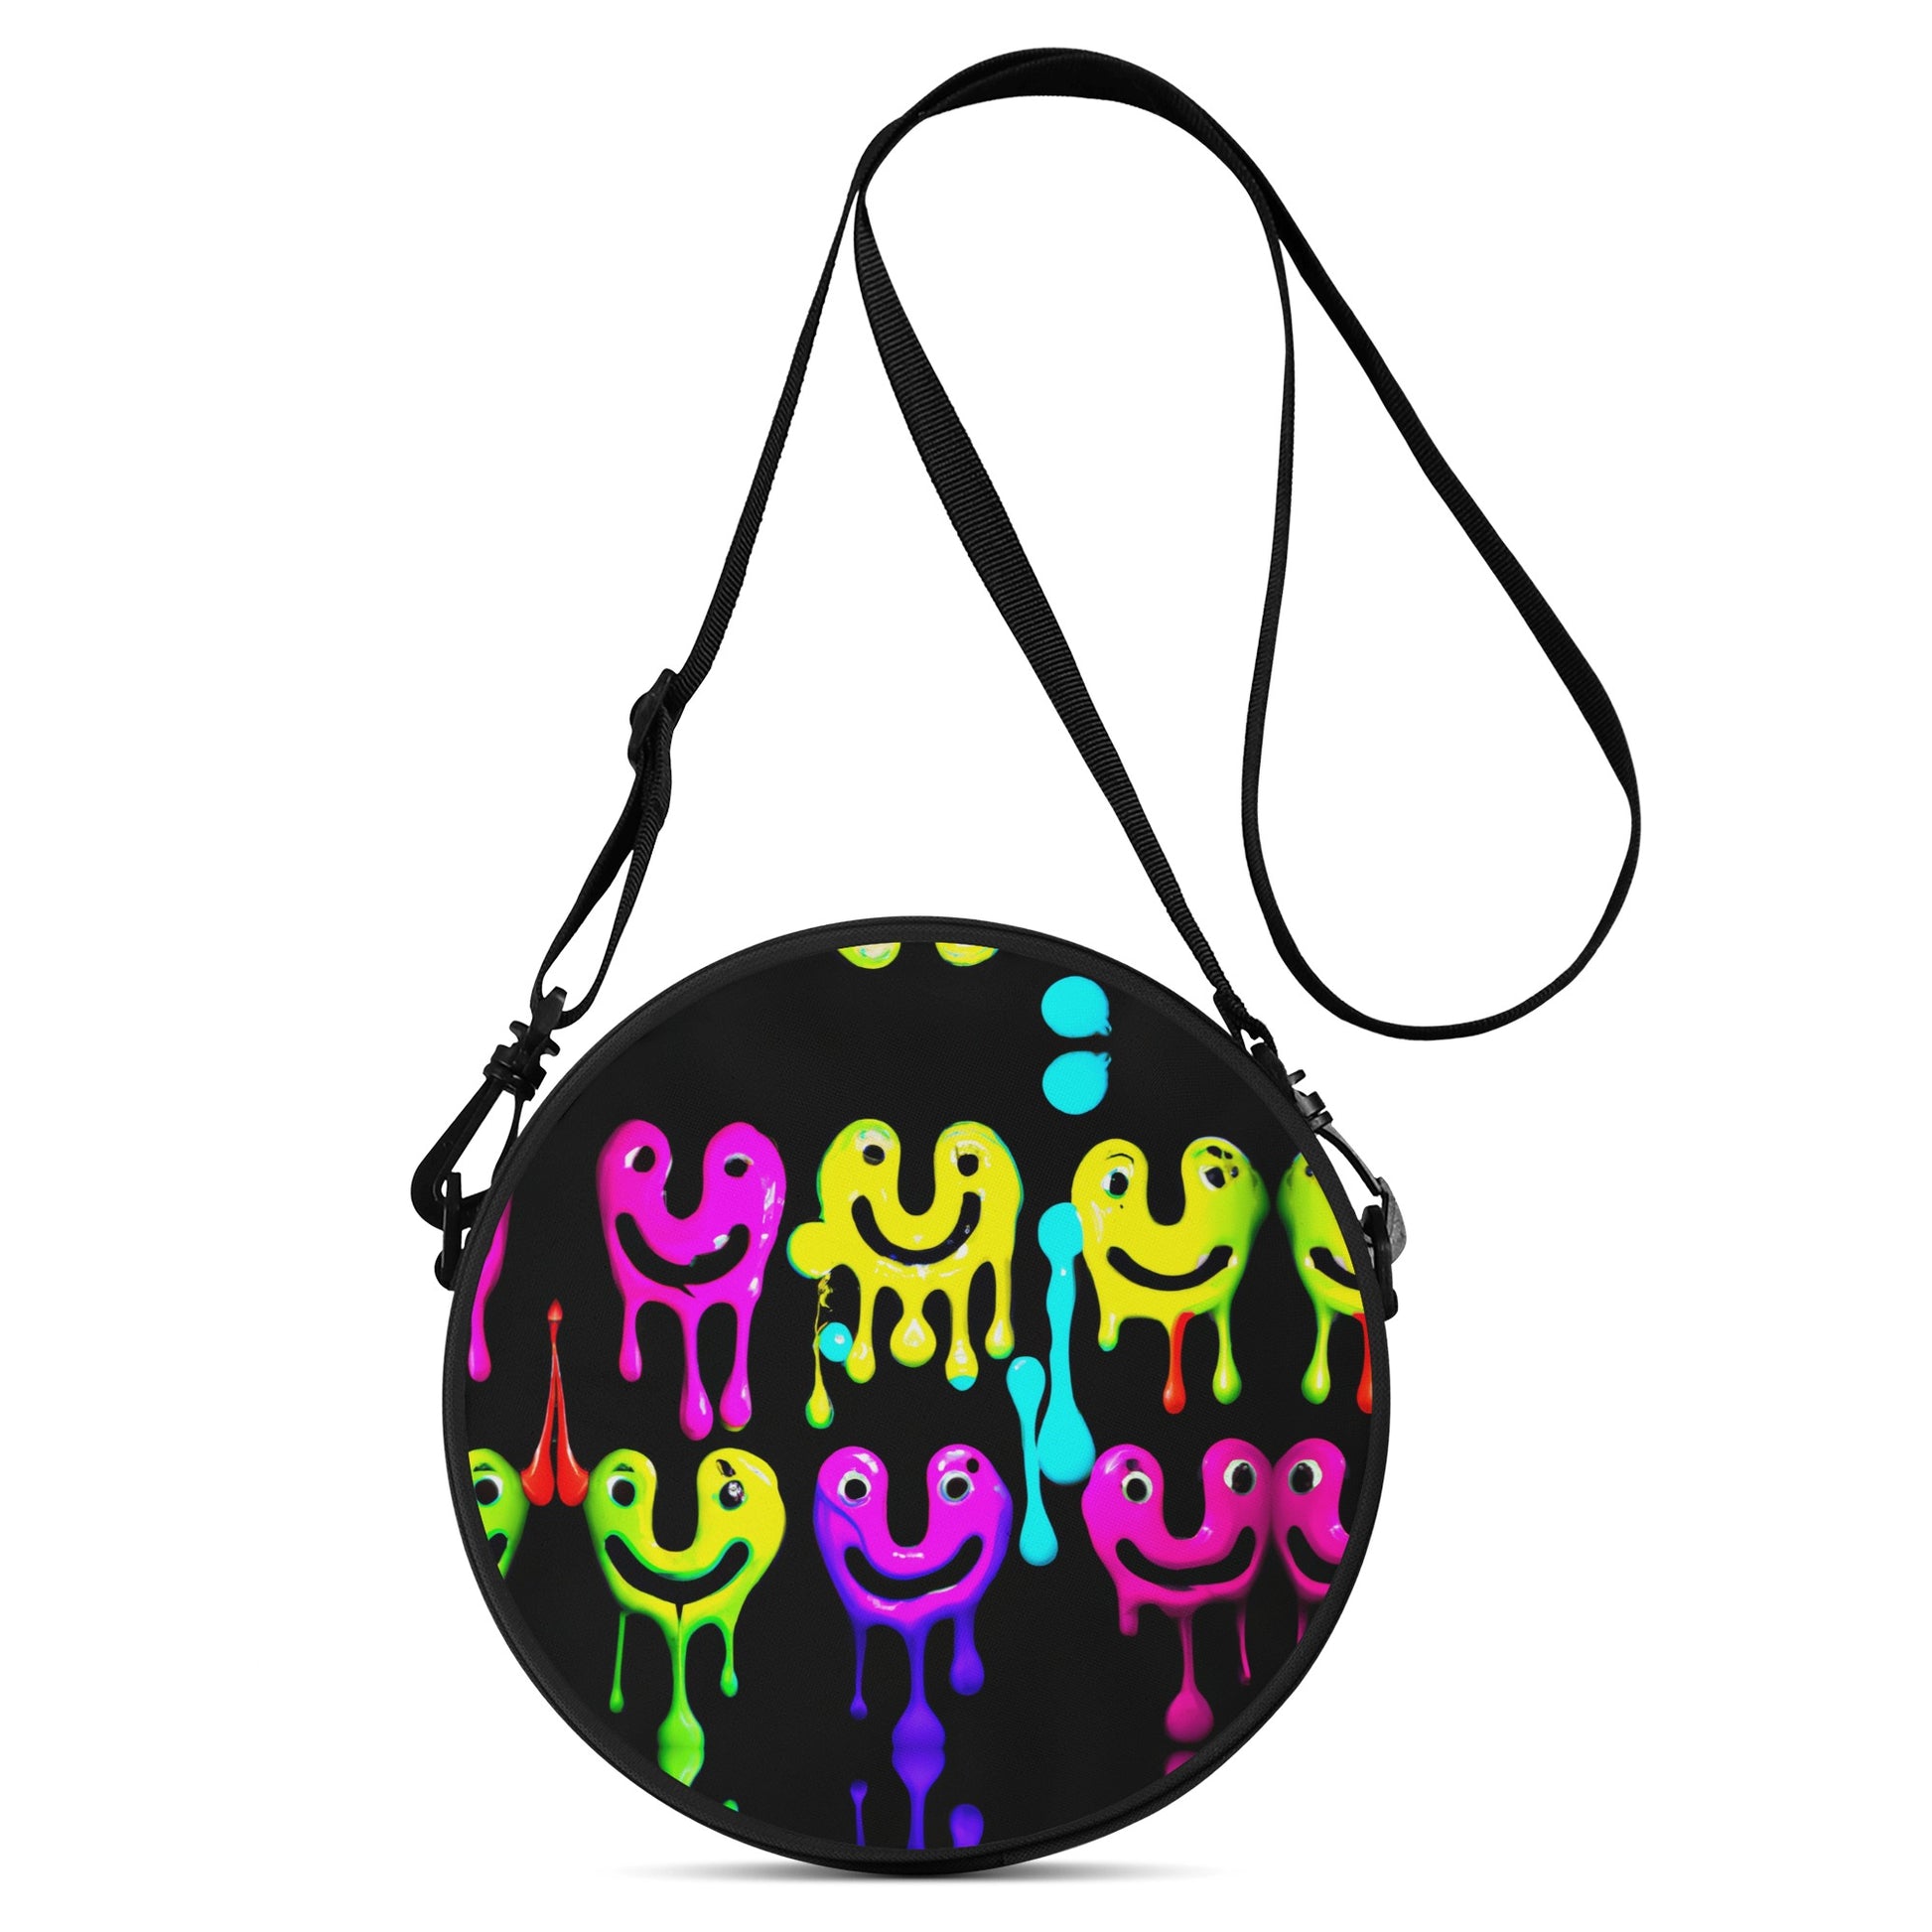 The Smile Melt Round Satchel bag is unisex. This chic round satchel bag has a vibrant digitally printed design.  Featuring a bright print of spray-painted stencil smiley faces dripping down.